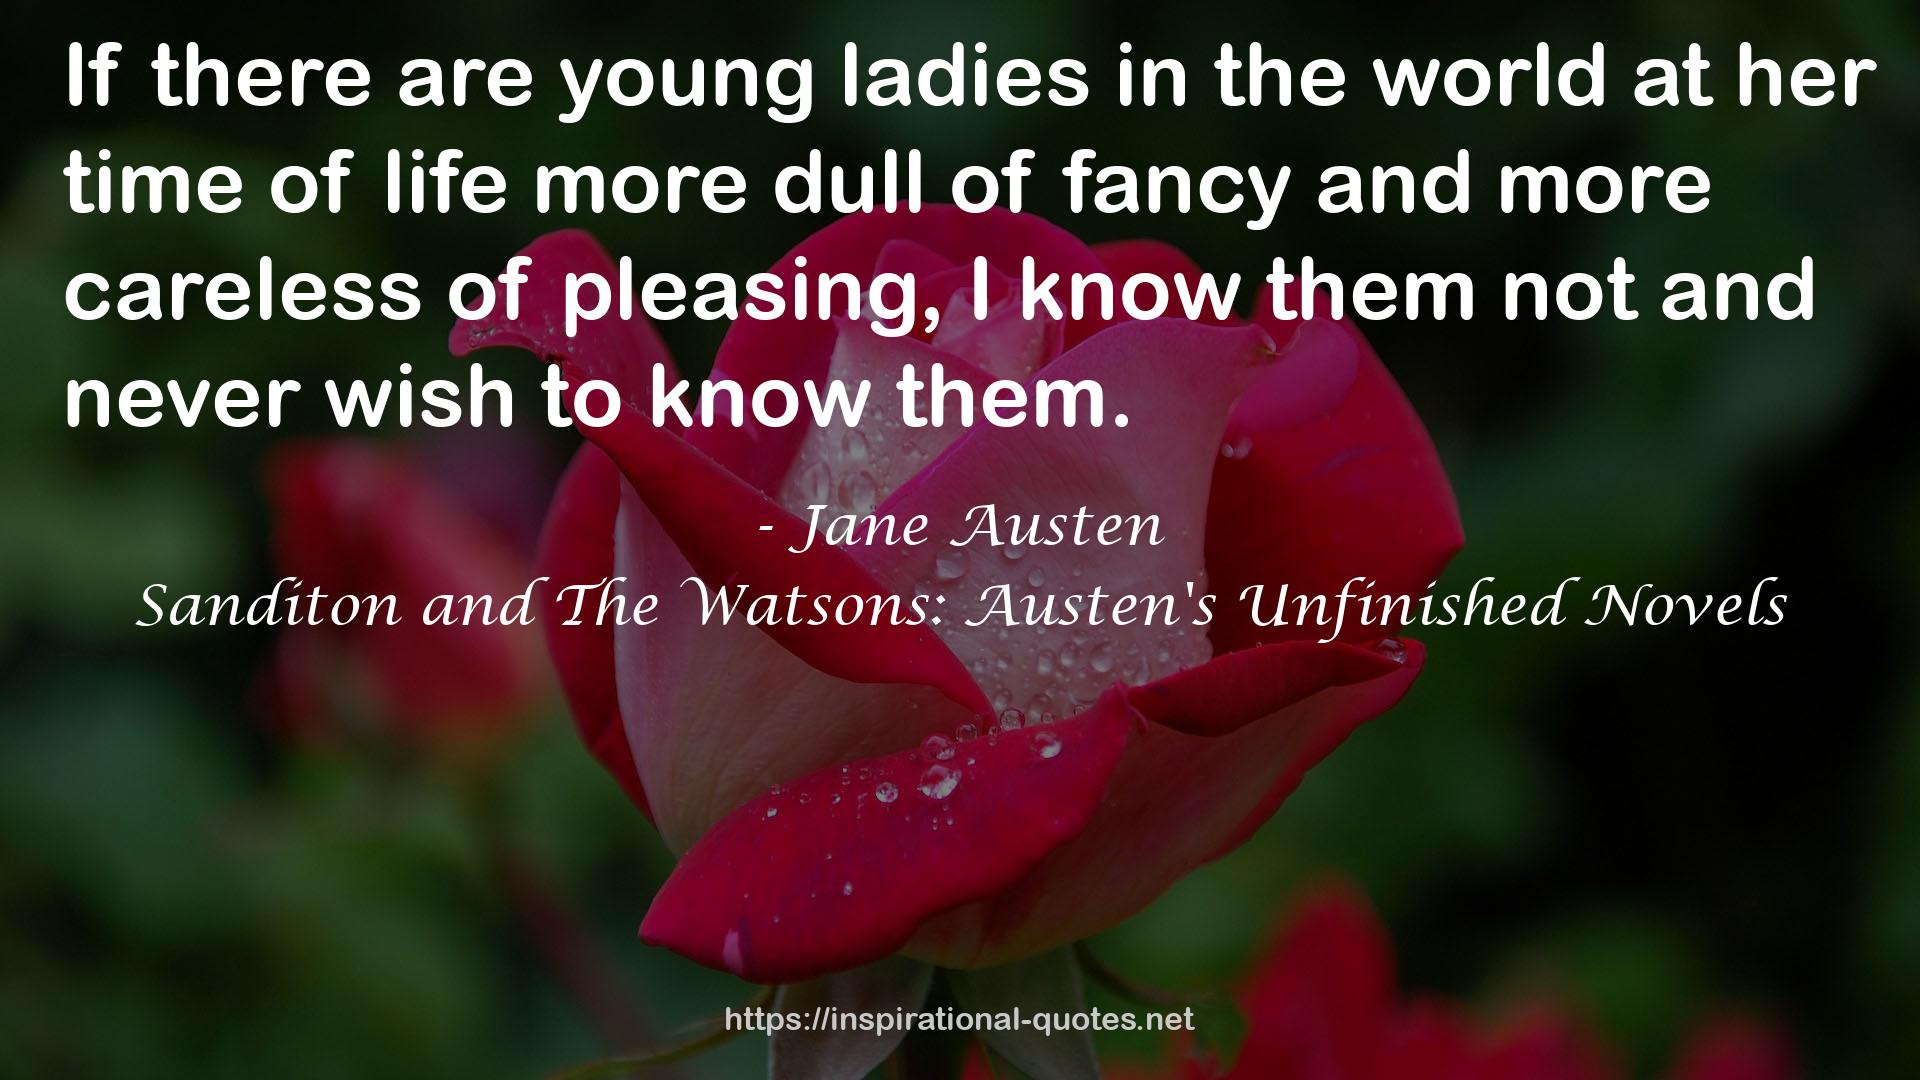 Sanditon and The Watsons: Austen's Unfinished Novels QUOTES